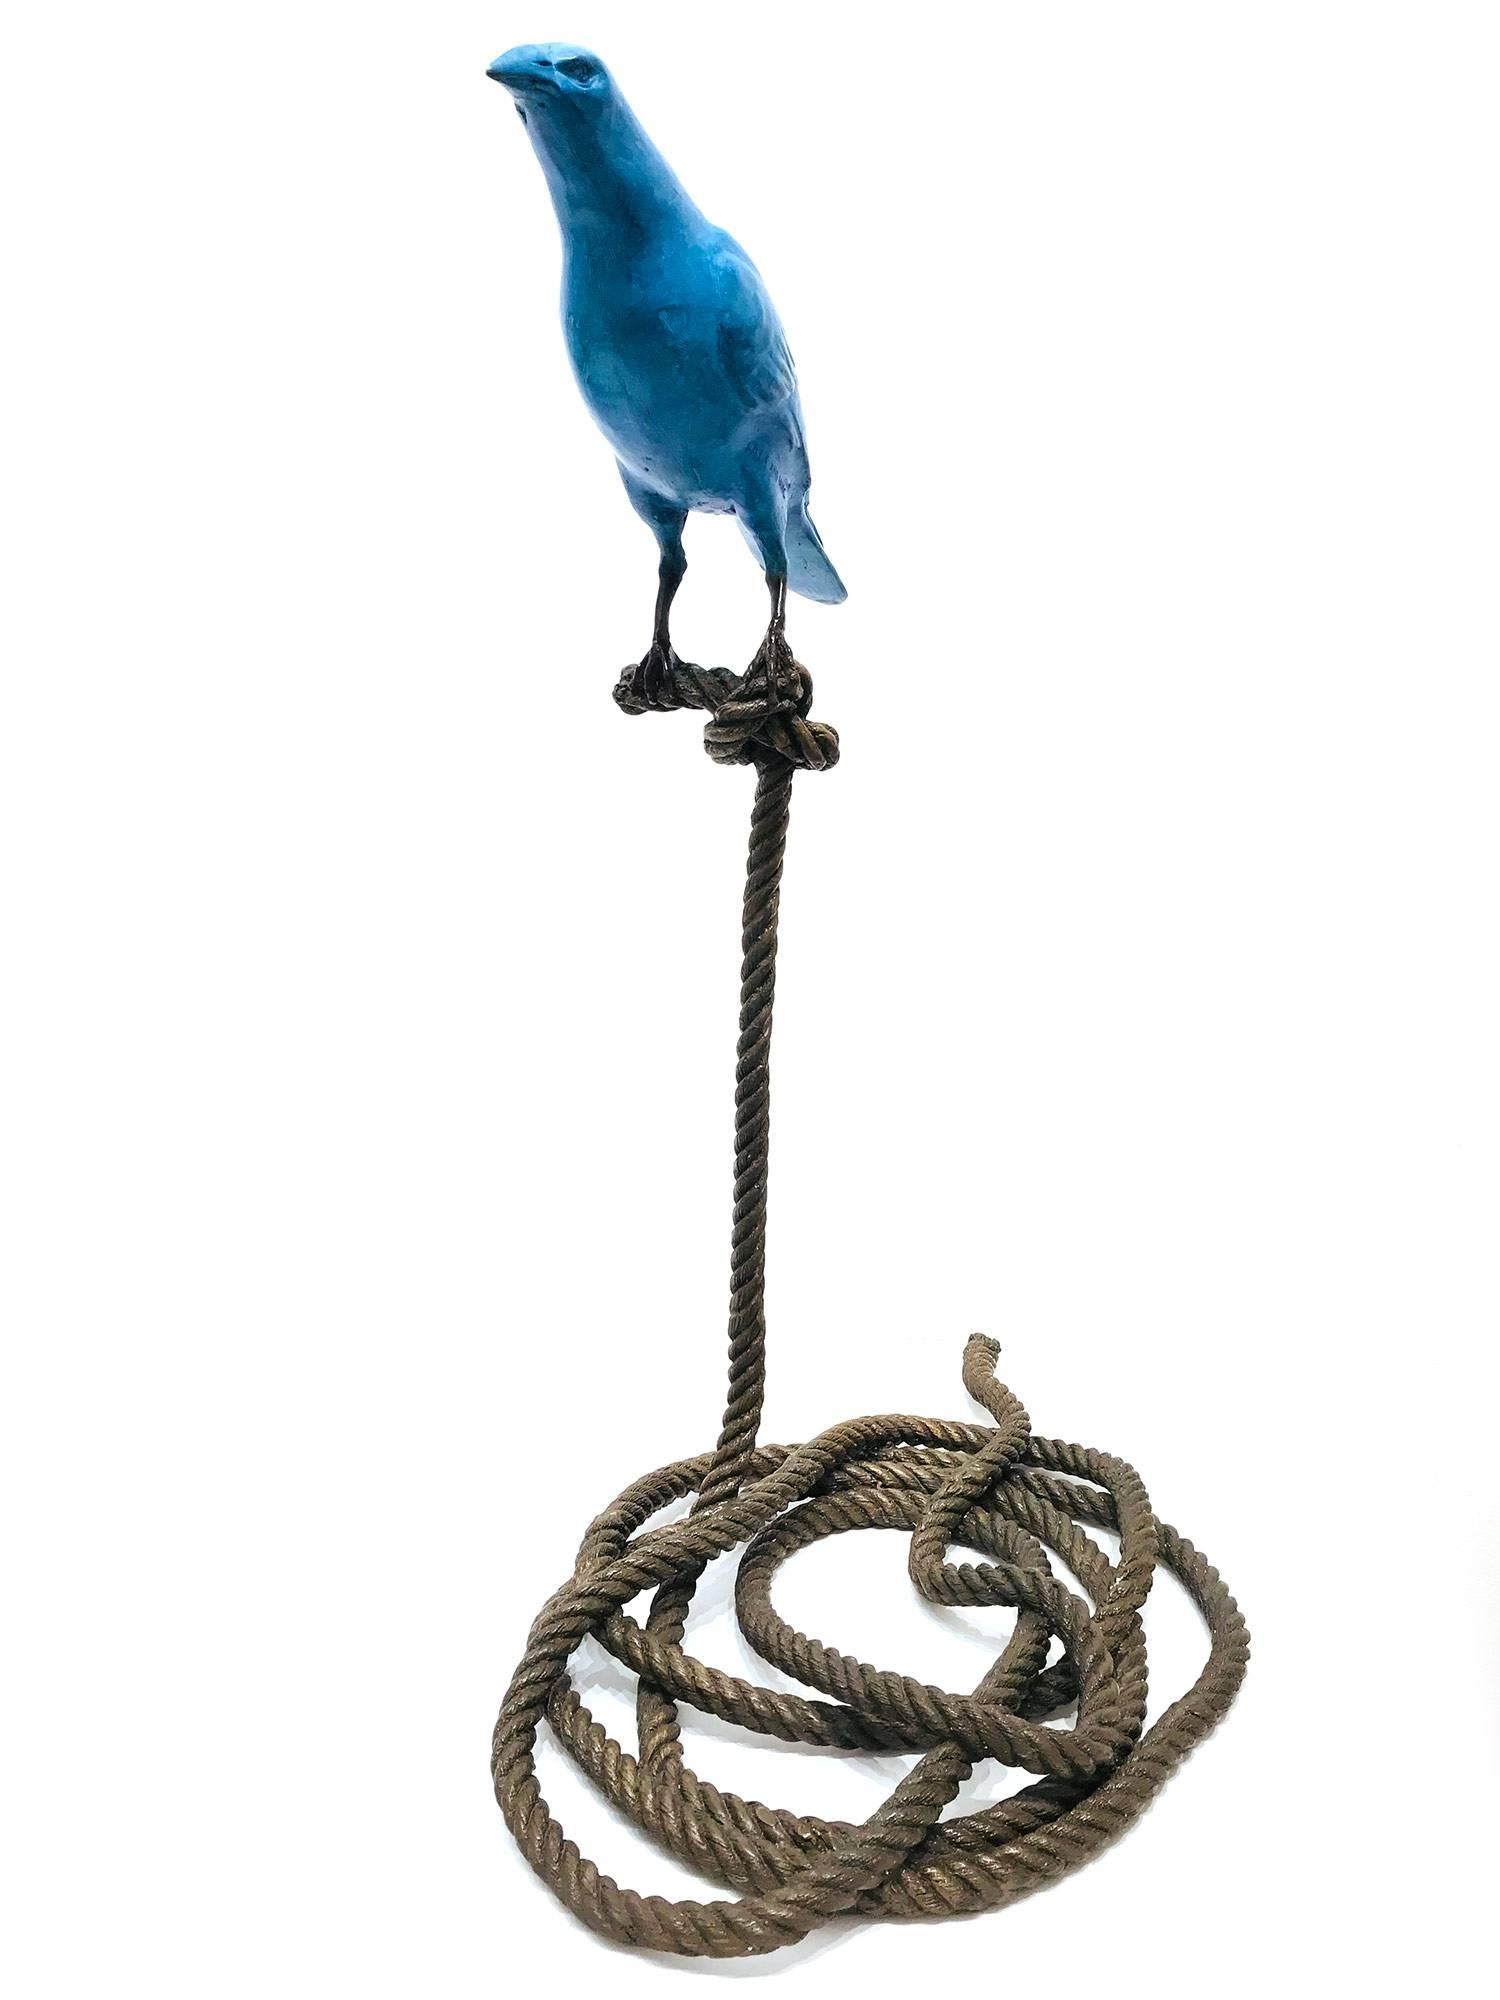 Sebastian, The Magpie on Rope - Sculpture by Gillie and Marc Schattner